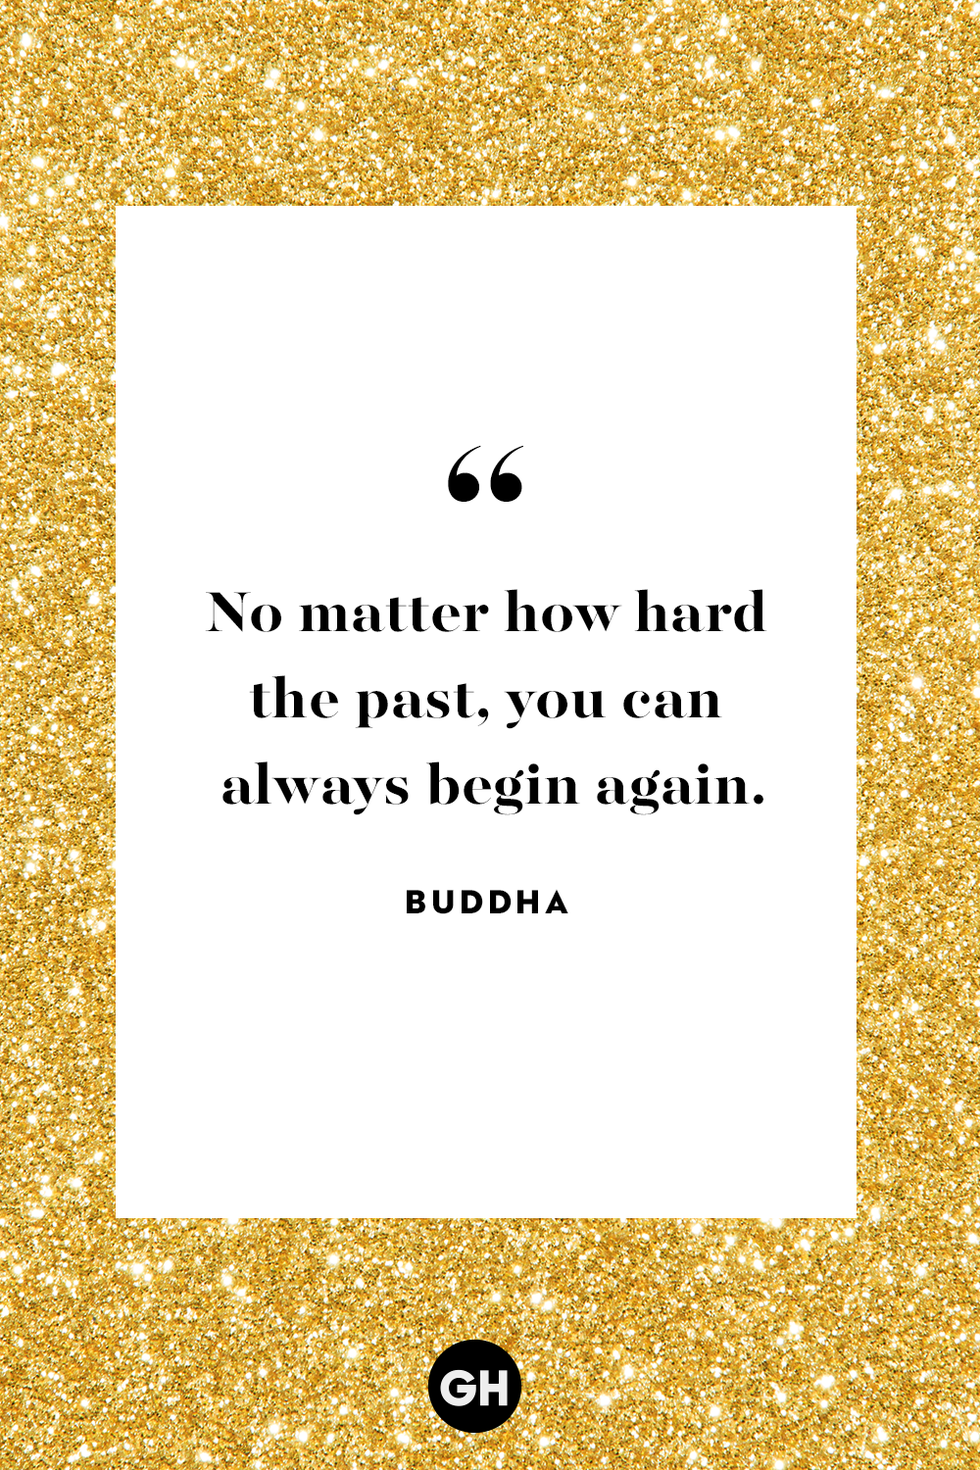 new years eve quote by buddha